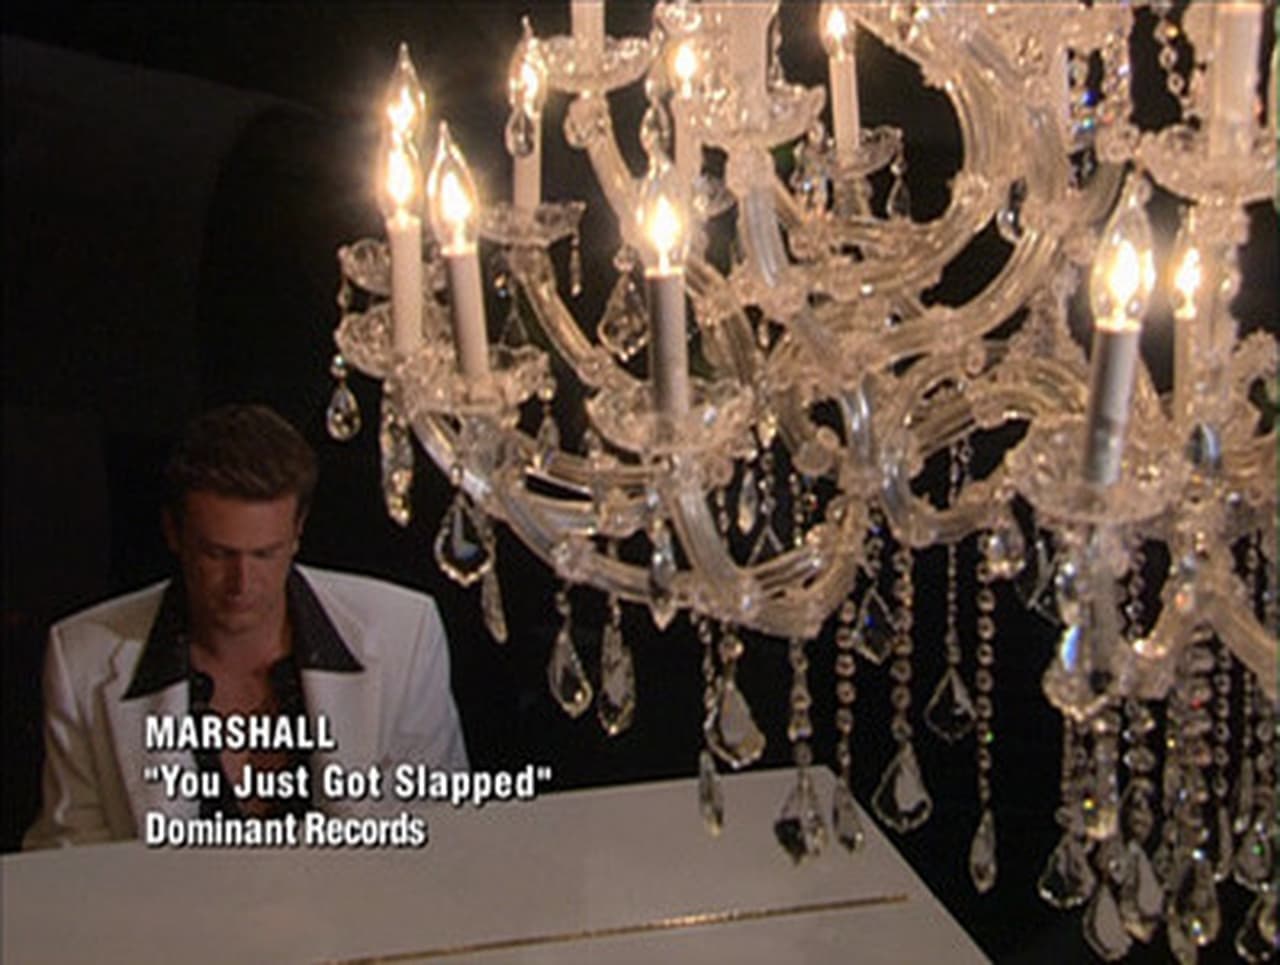 How I Met Your Mother - Season 0 Episode 3 : Marshall's Music Video - You Just Got Slapped